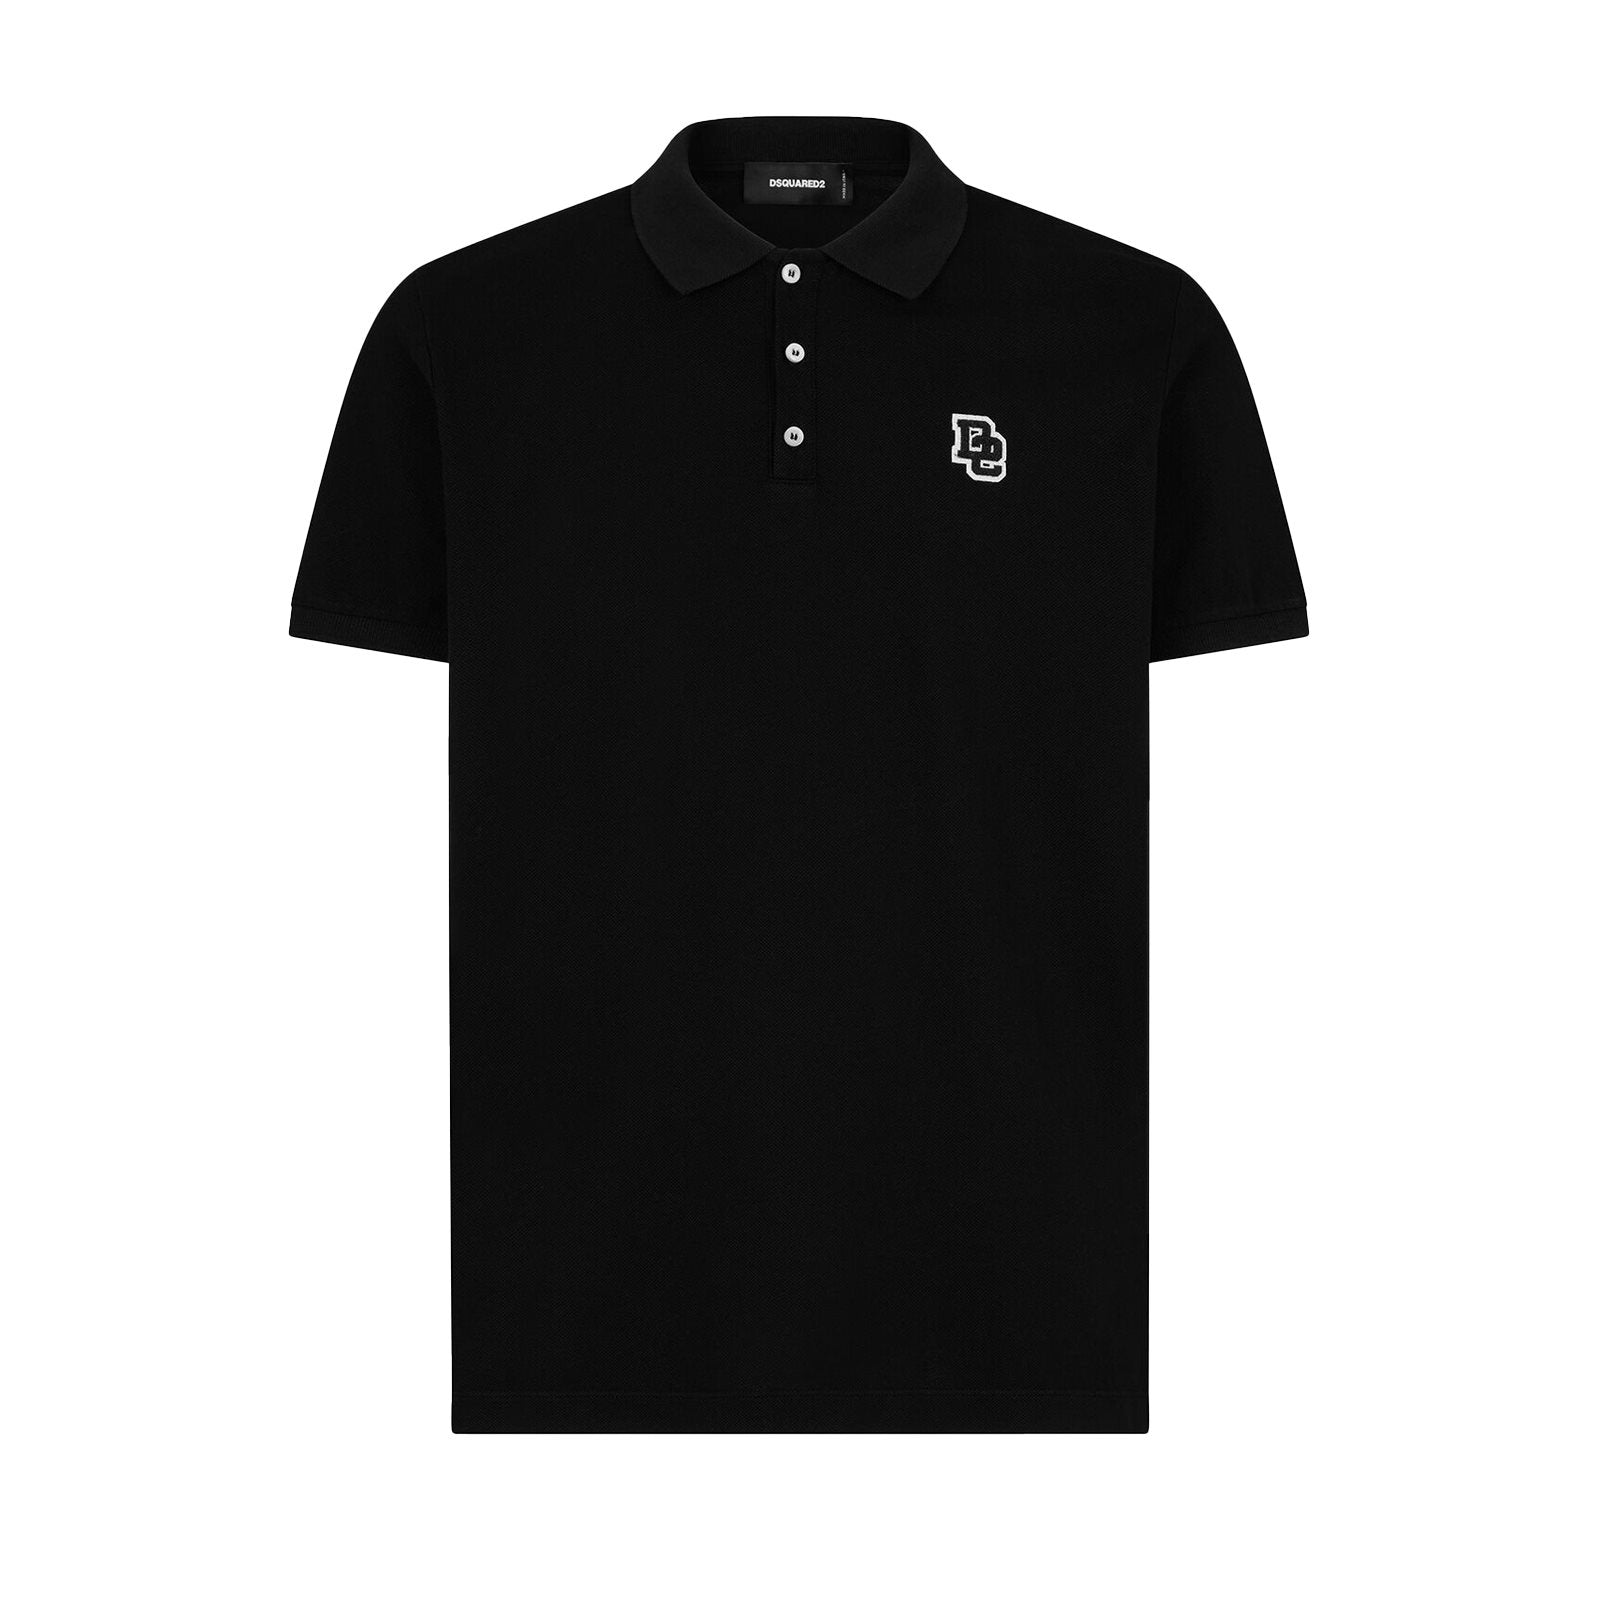 Tennis fit polo